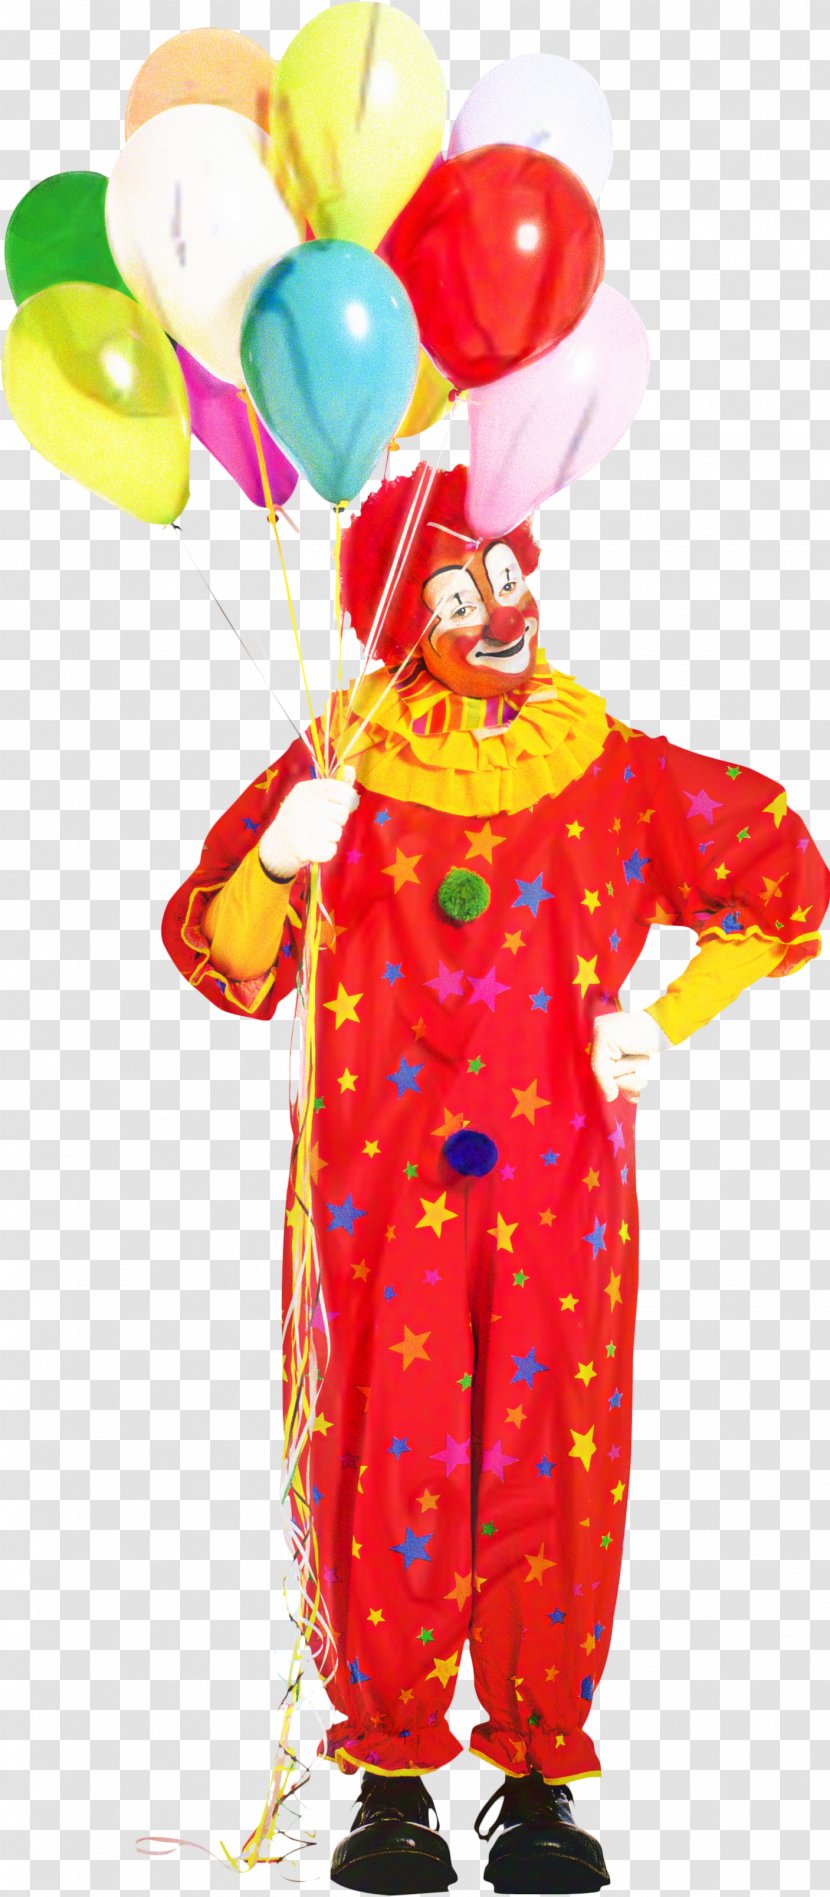 Images Cartoon - Clown - Toy Jester Transparent PNG